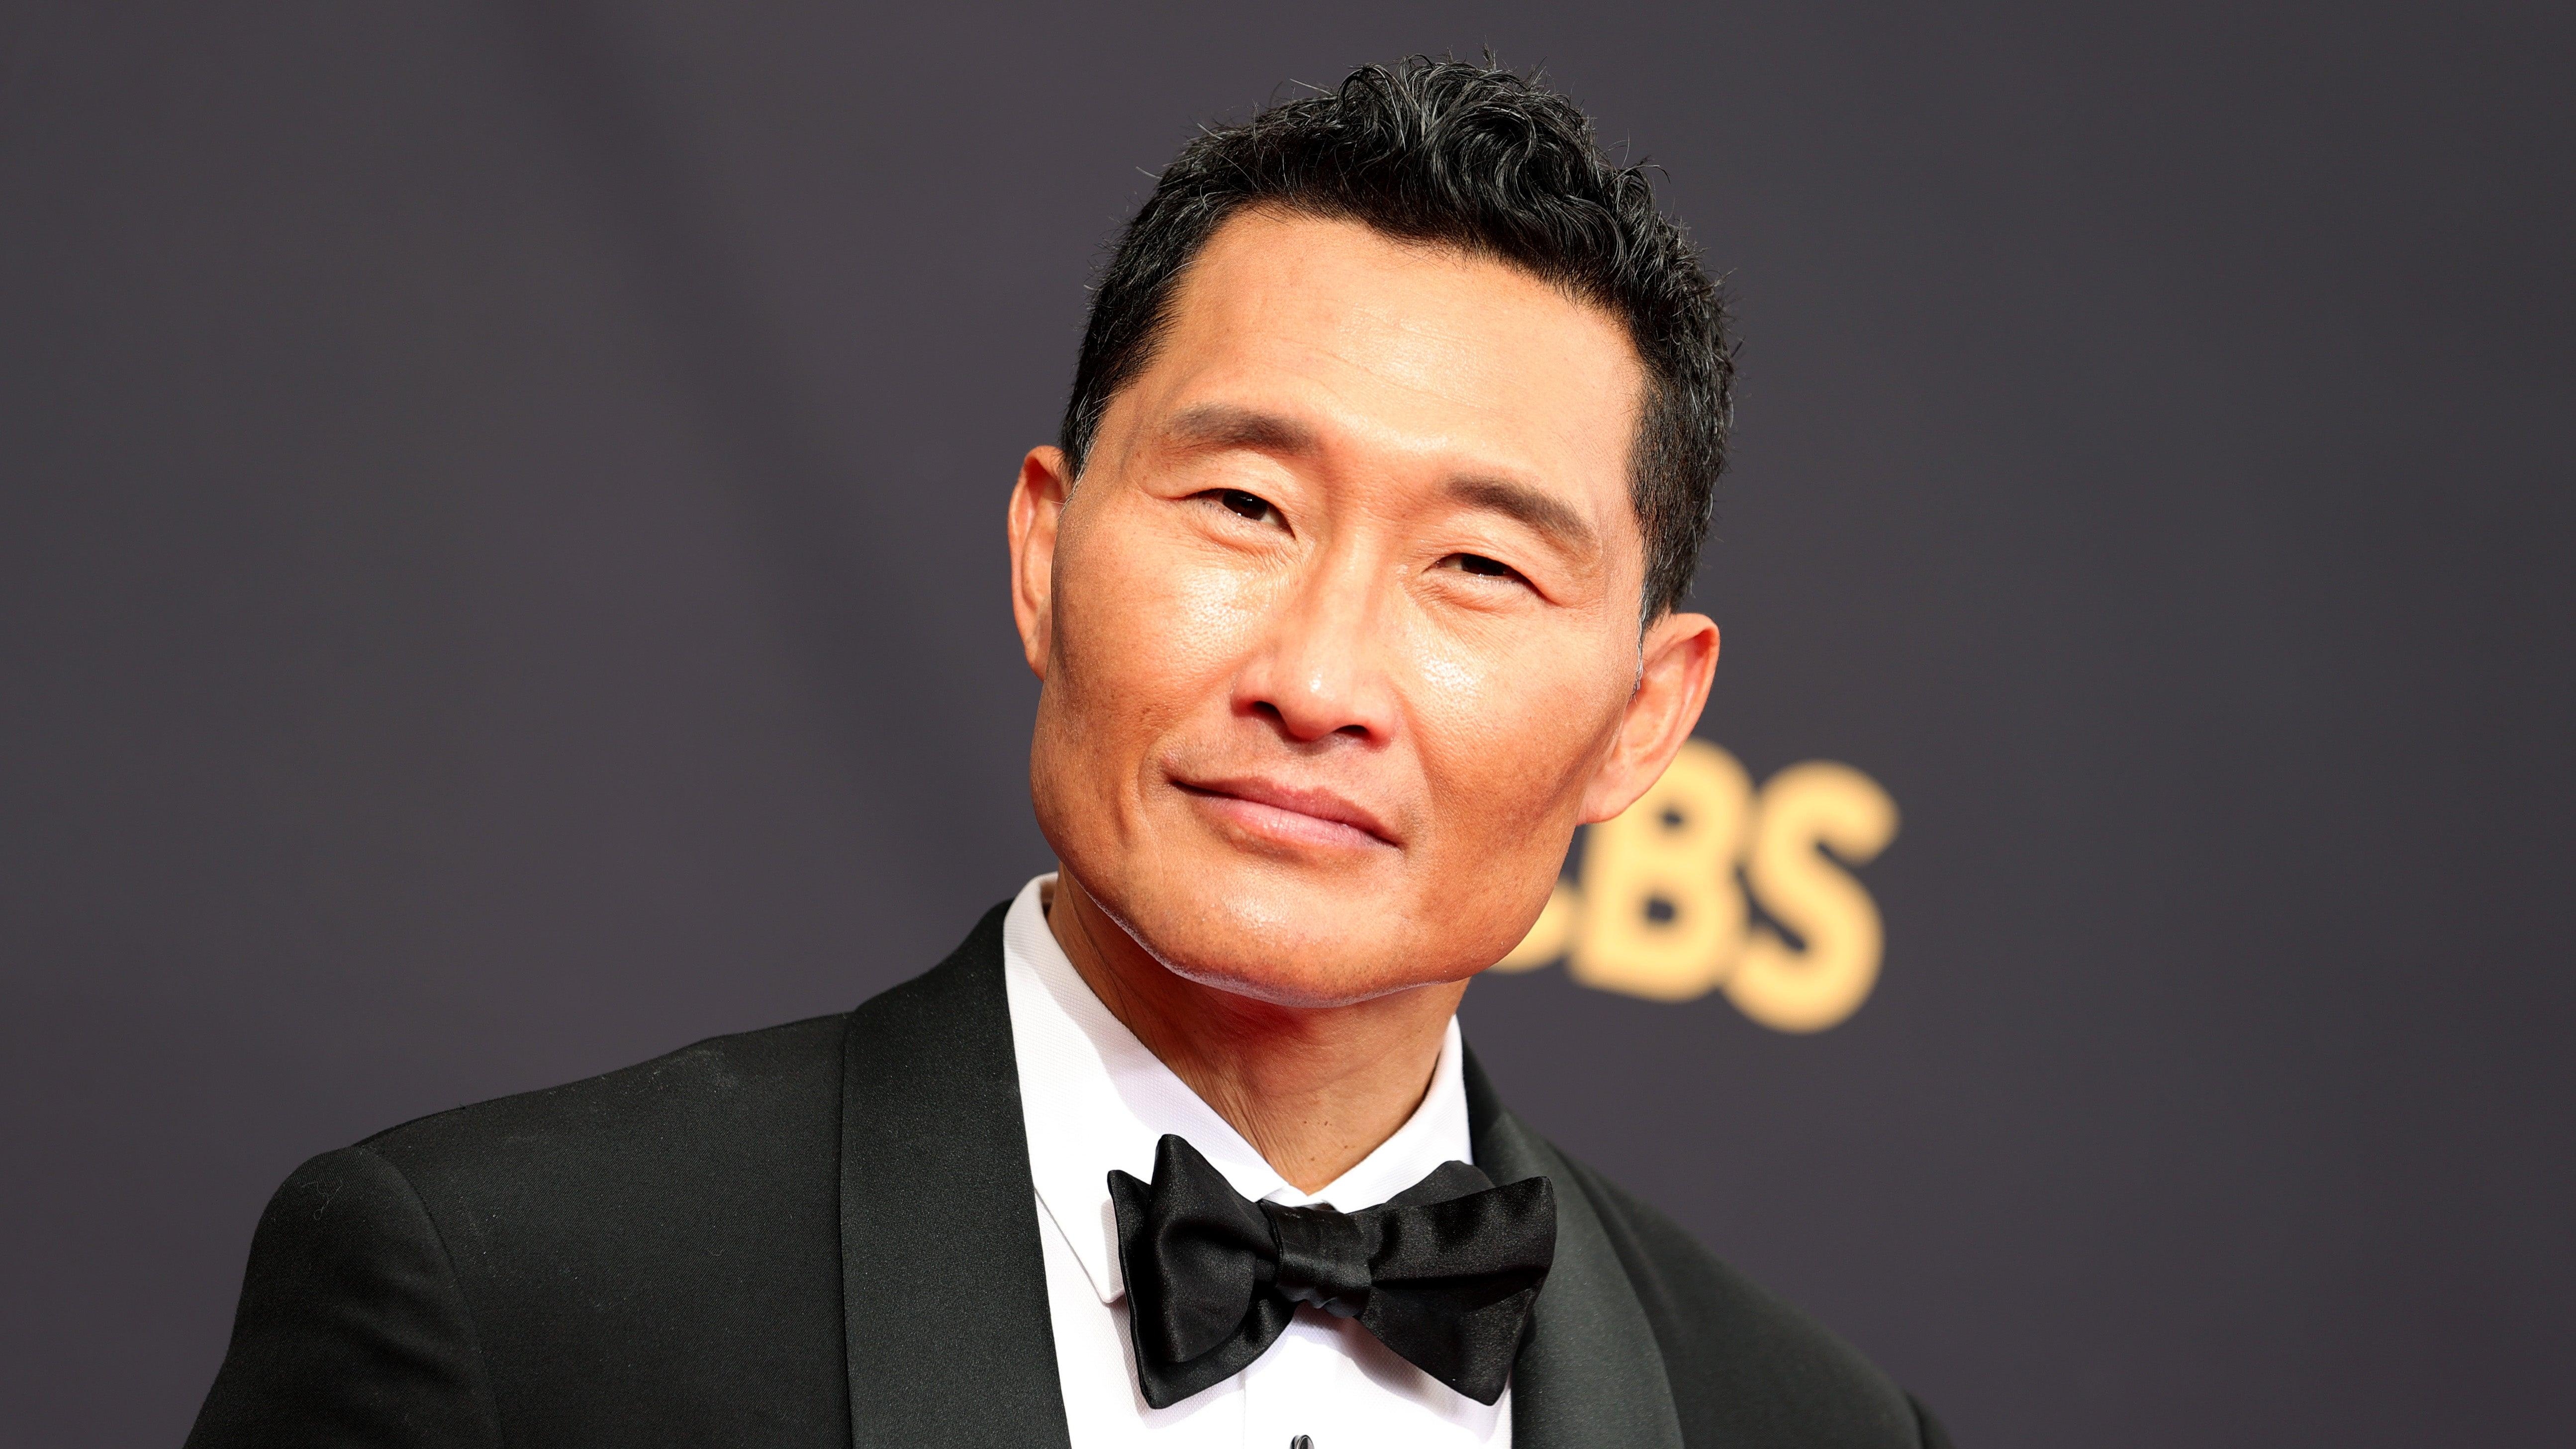 Daniel Dae Kim will play the Big Bad in Netflix’s live-action Avatar: The Last Airbender